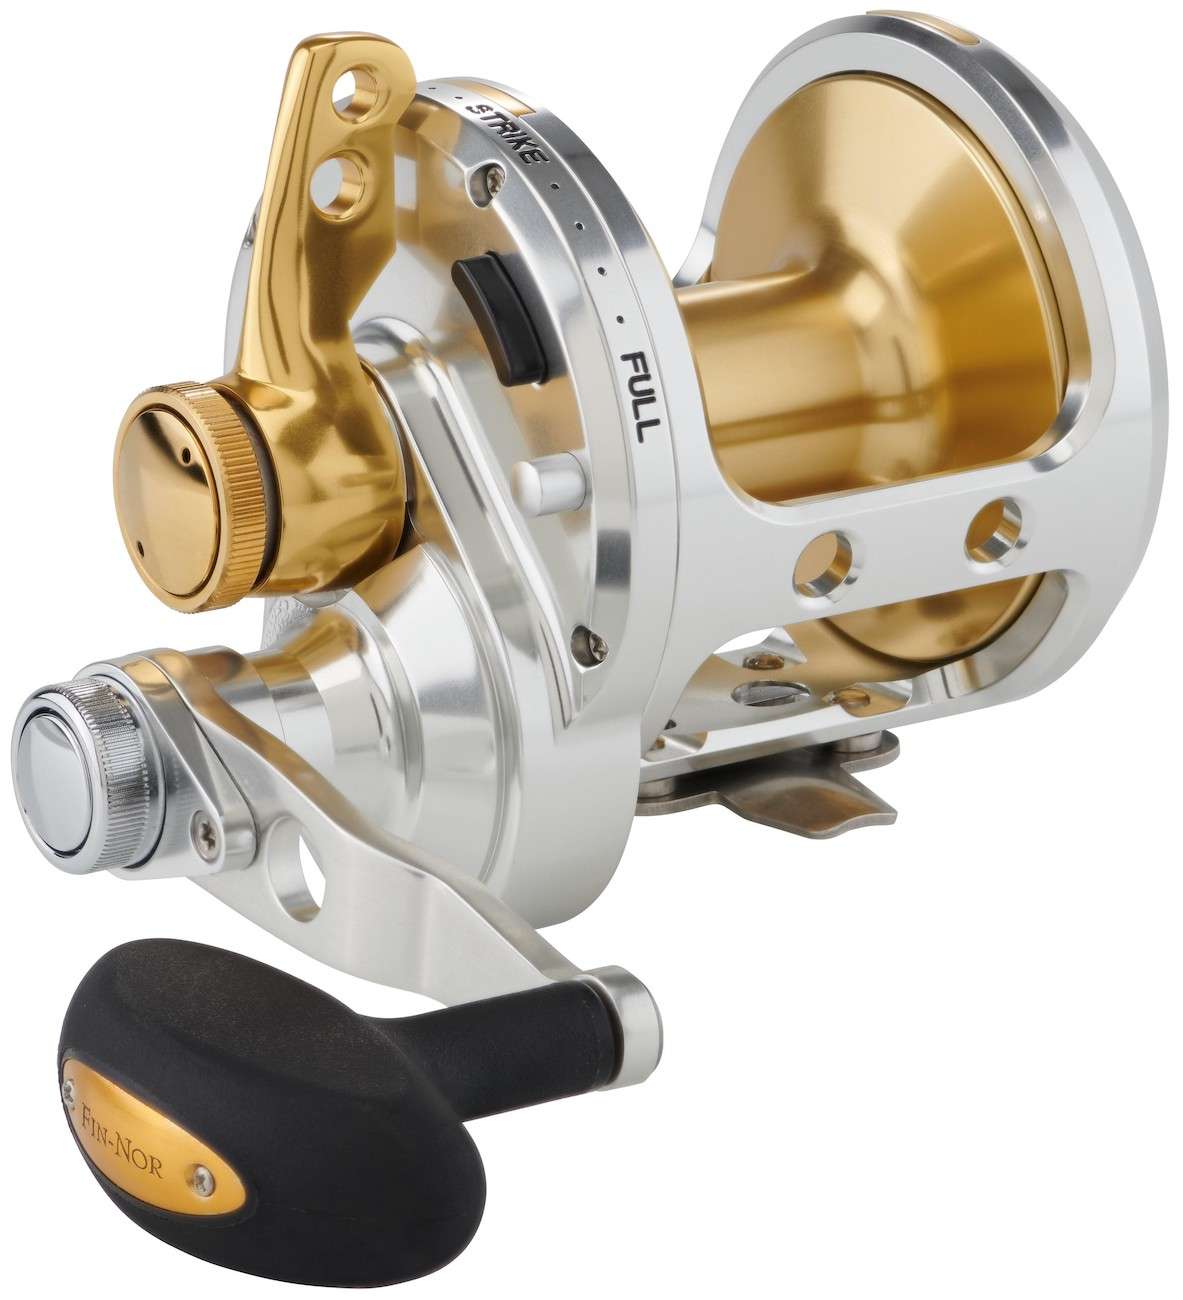 Fin Nor Marquesa sea fishing boat reel 2 sizes 20 30 and in twin speed or 2  speed the twin speed is the top seller big sale up to 50% off